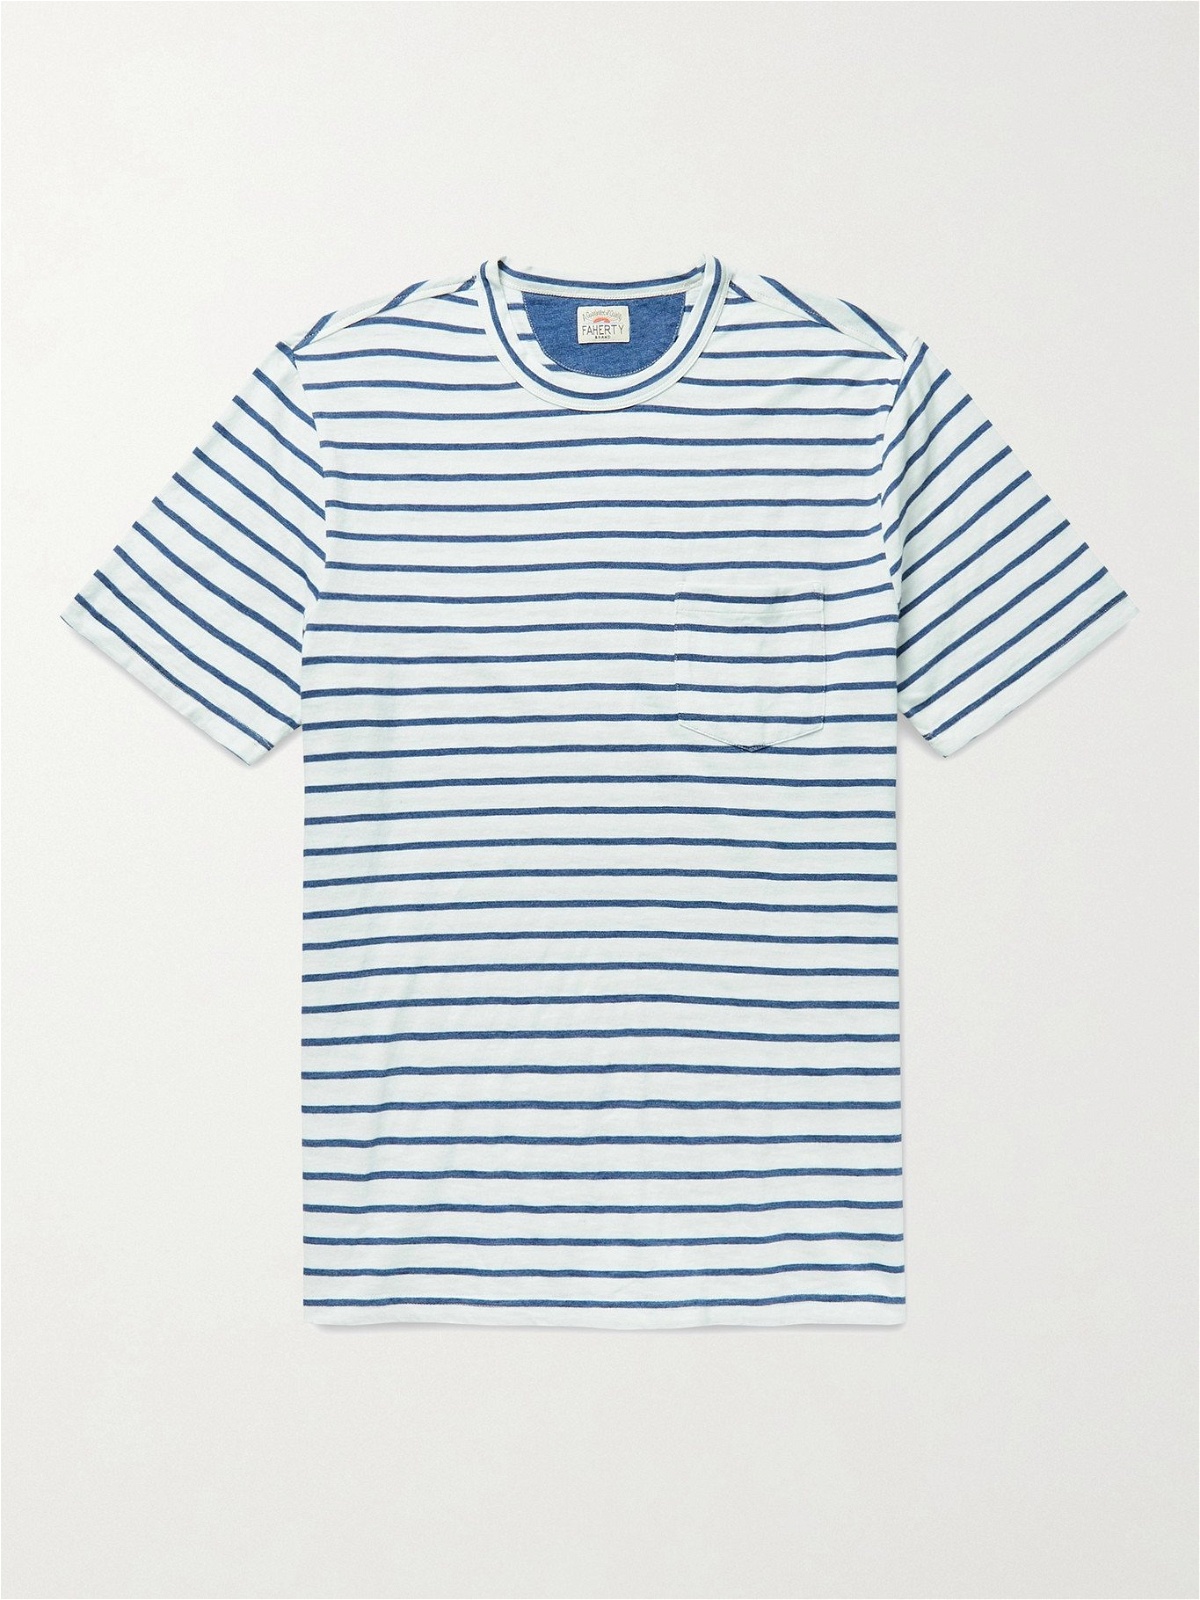 Faherty - Striped Cotton-Jersey T-Shirt - Blue Faherty